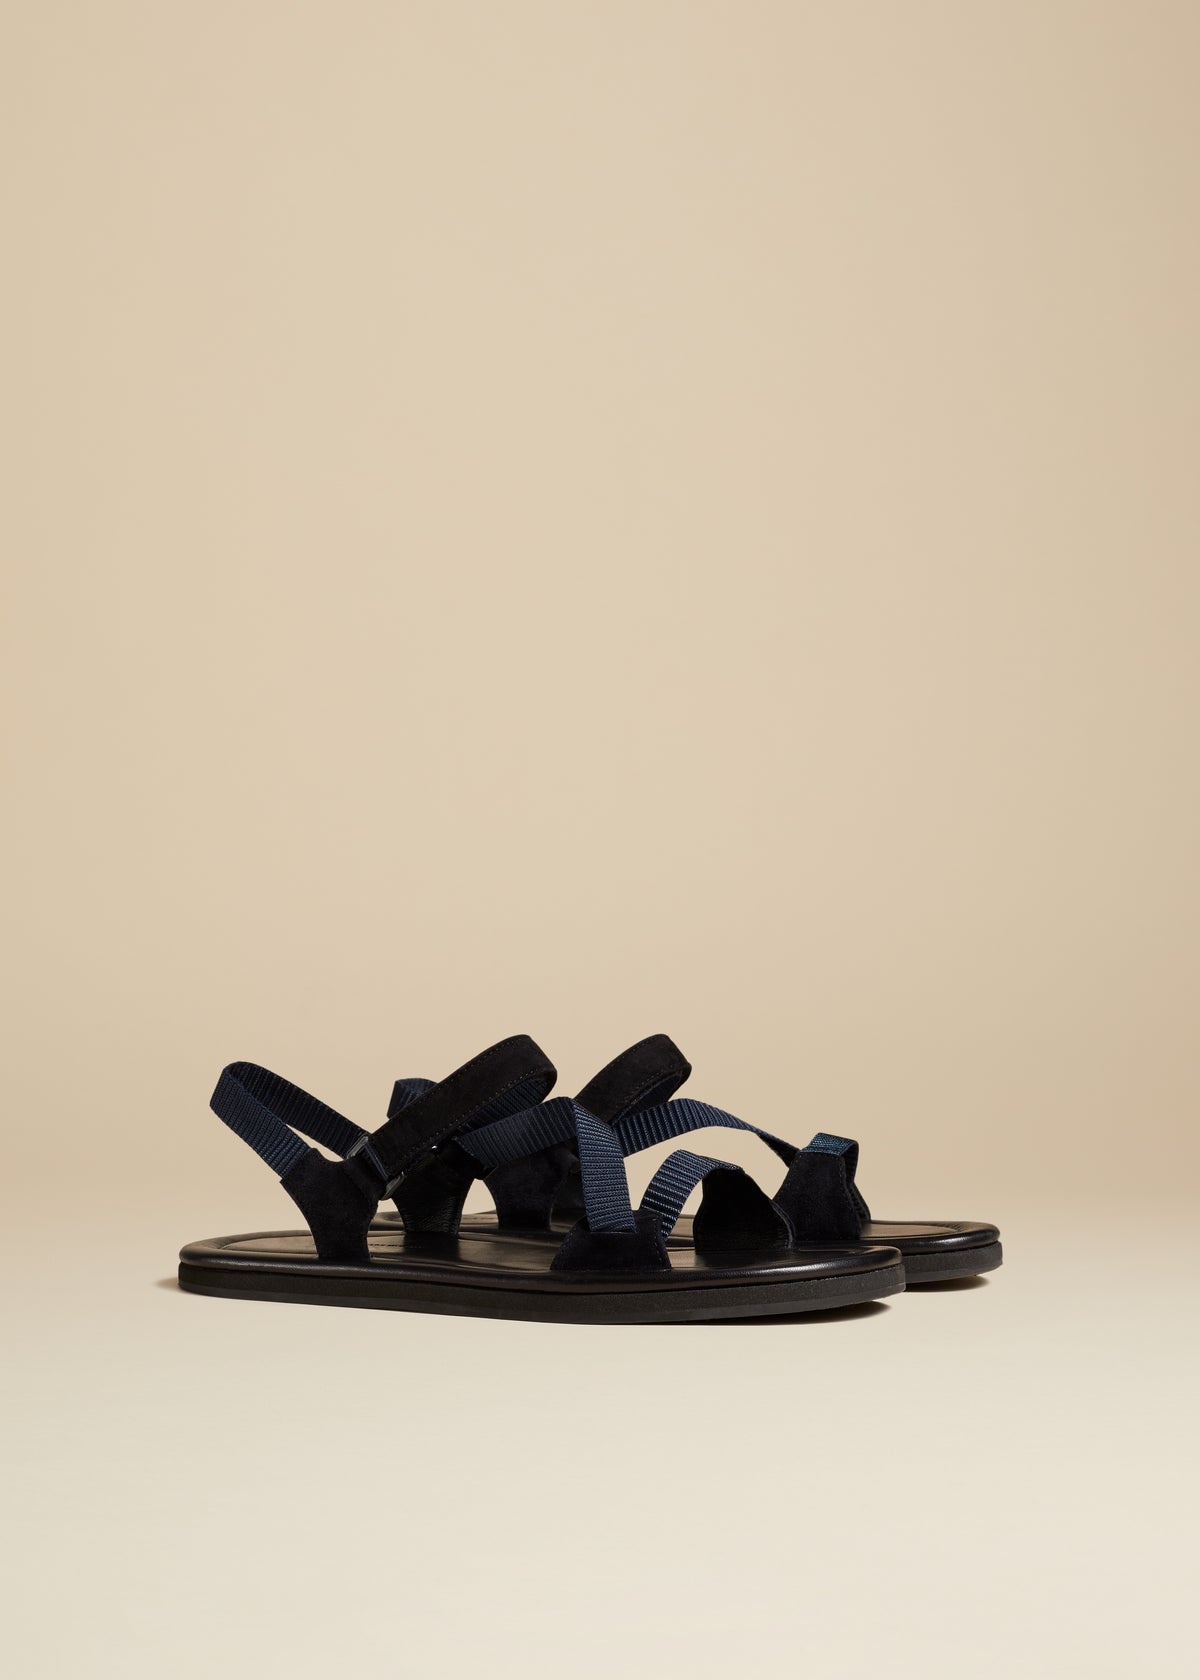 The Hacker Sandal in Navy and Black - 2